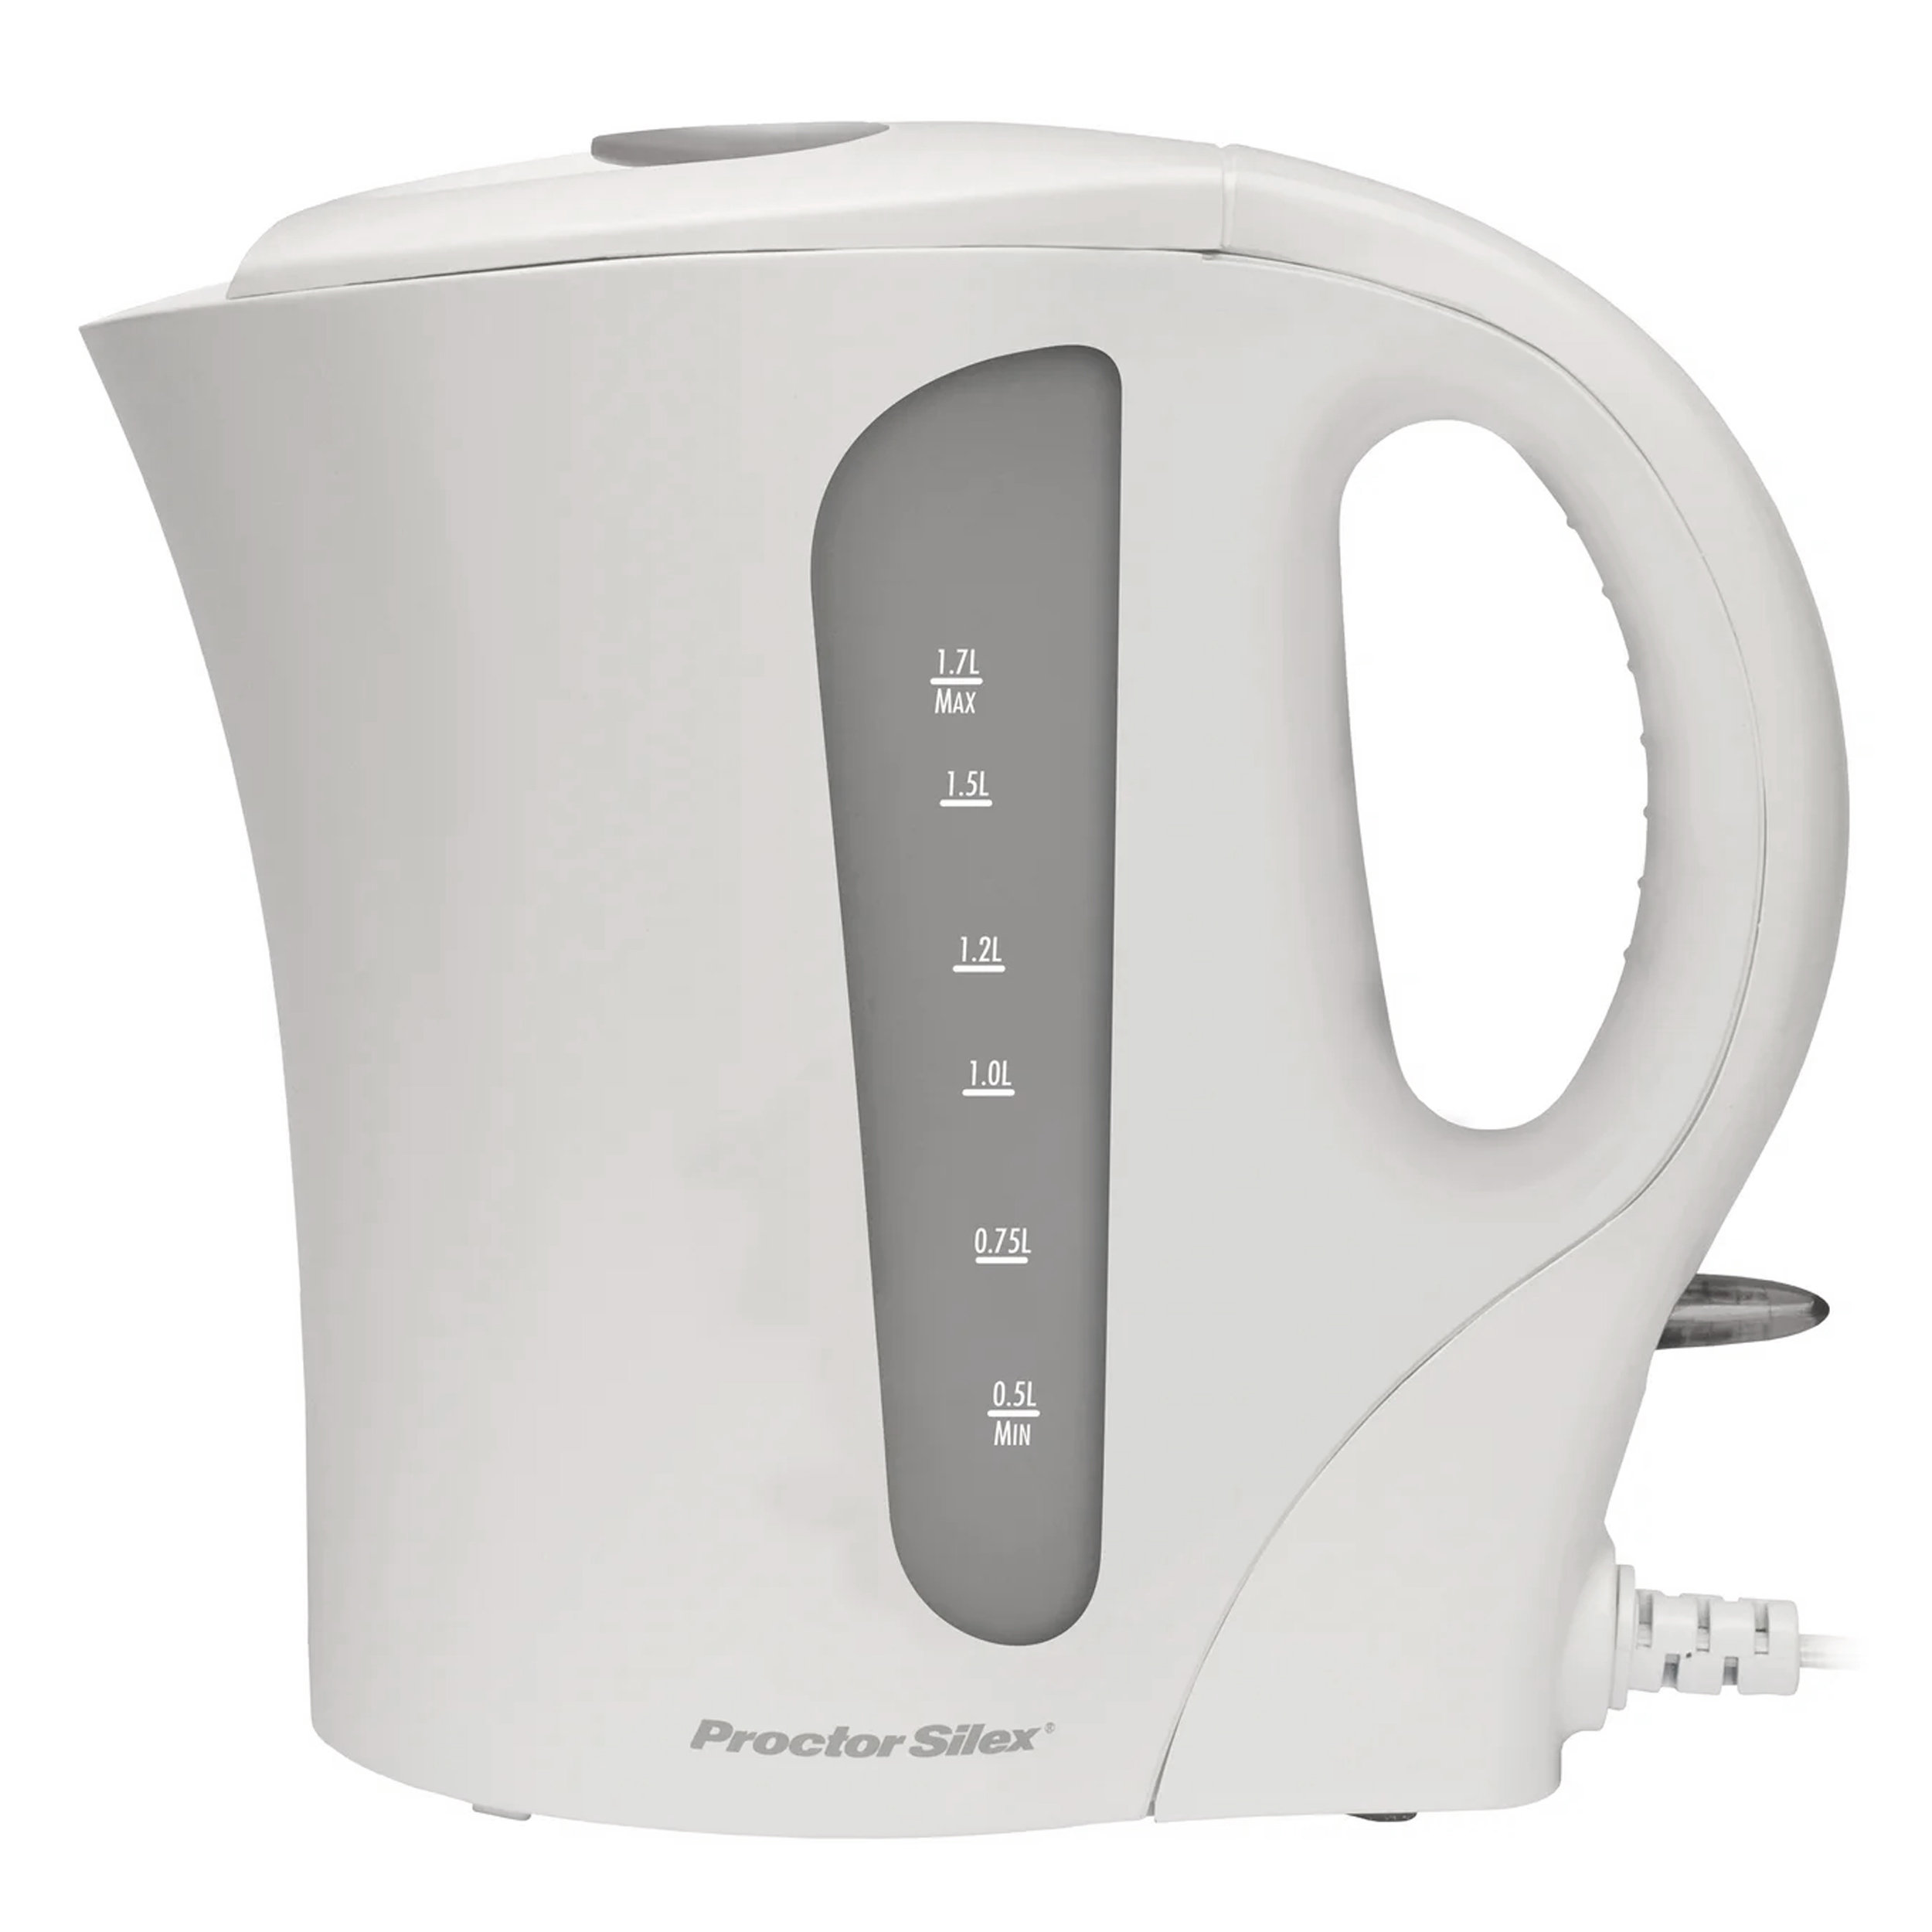 oli Electric Kettle - Fast Boiling and Cordless Glass Tea Kettle (1.7L)